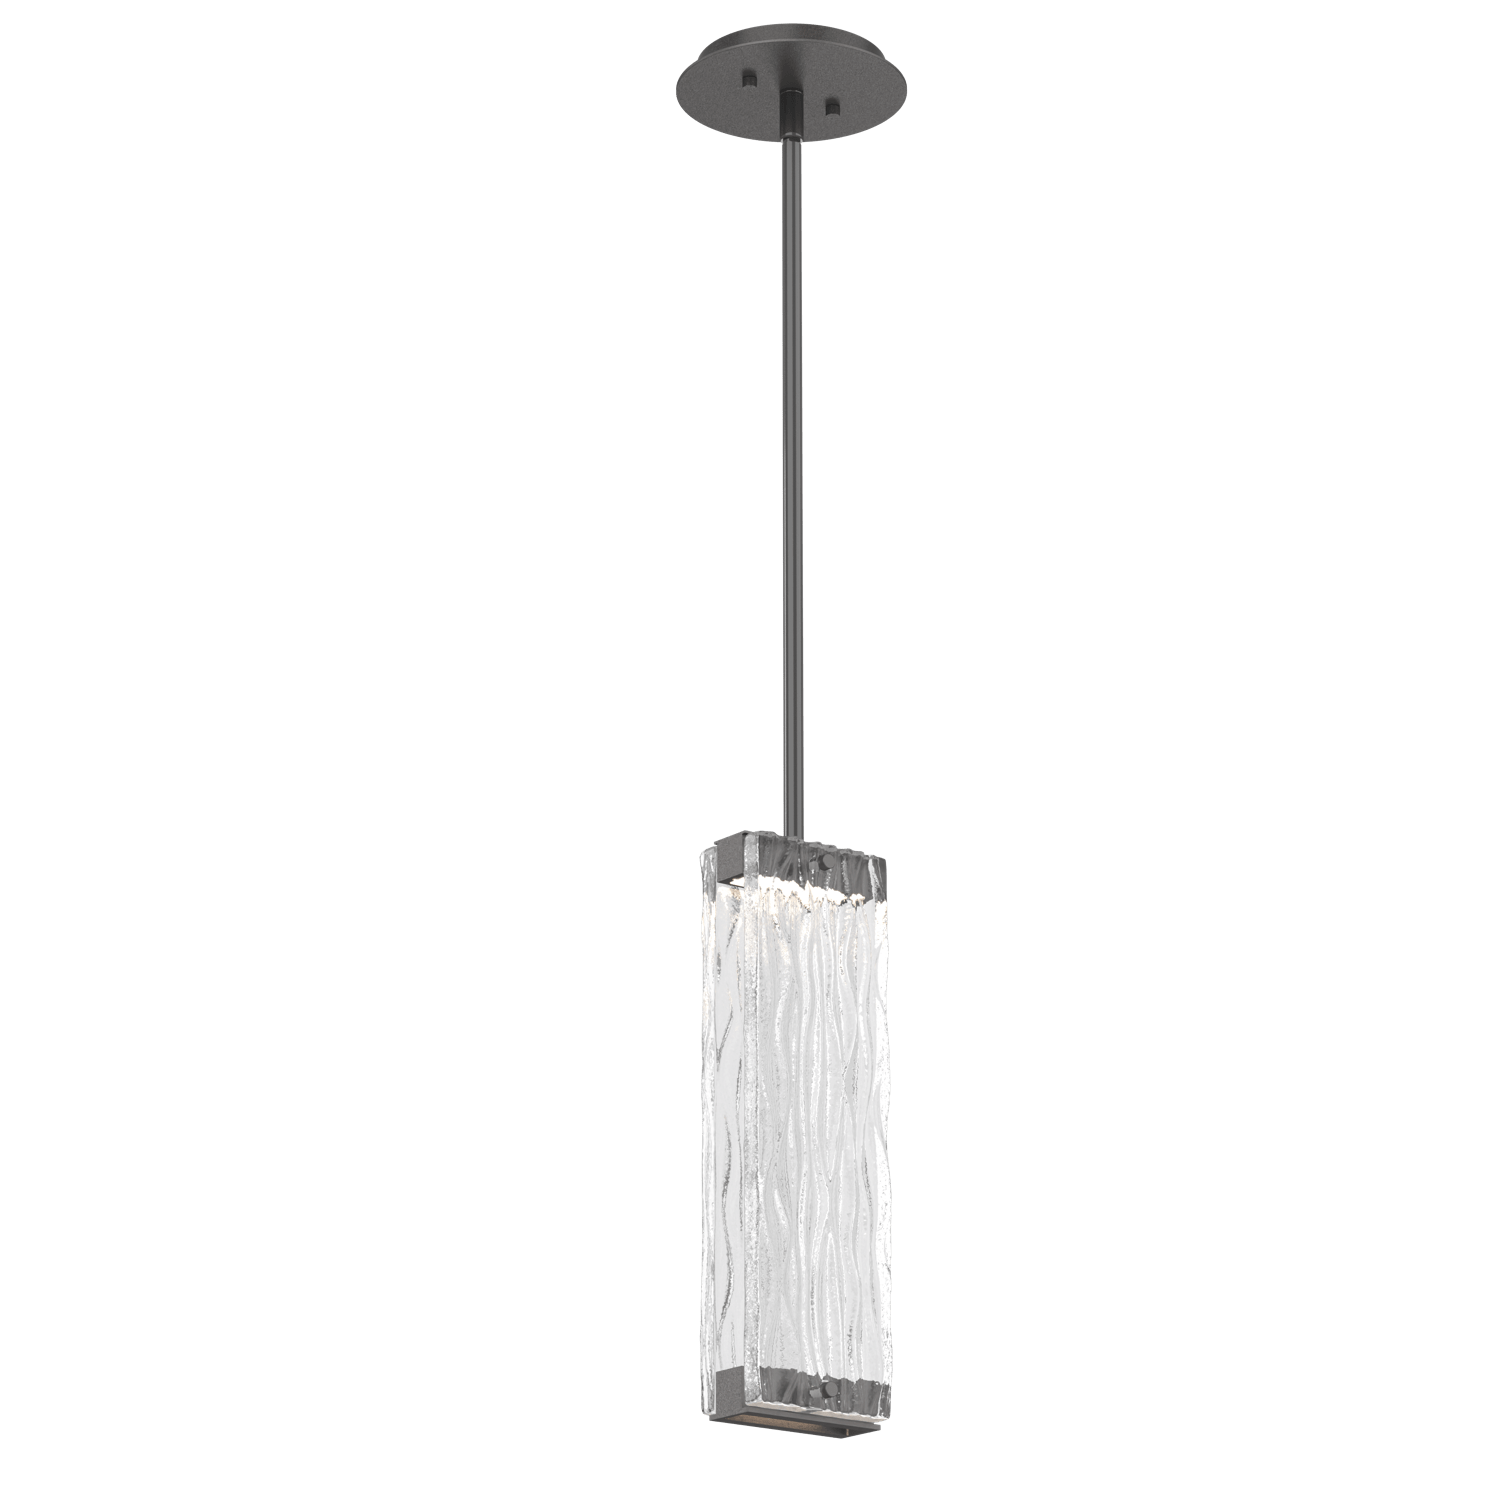 LAB0090-01-GP-TT-Hammerton-Studio-Tabulo-pendant-light-with-graphite-finish-and-clear-tidal-cast-glass-shade-and-LED-lamping